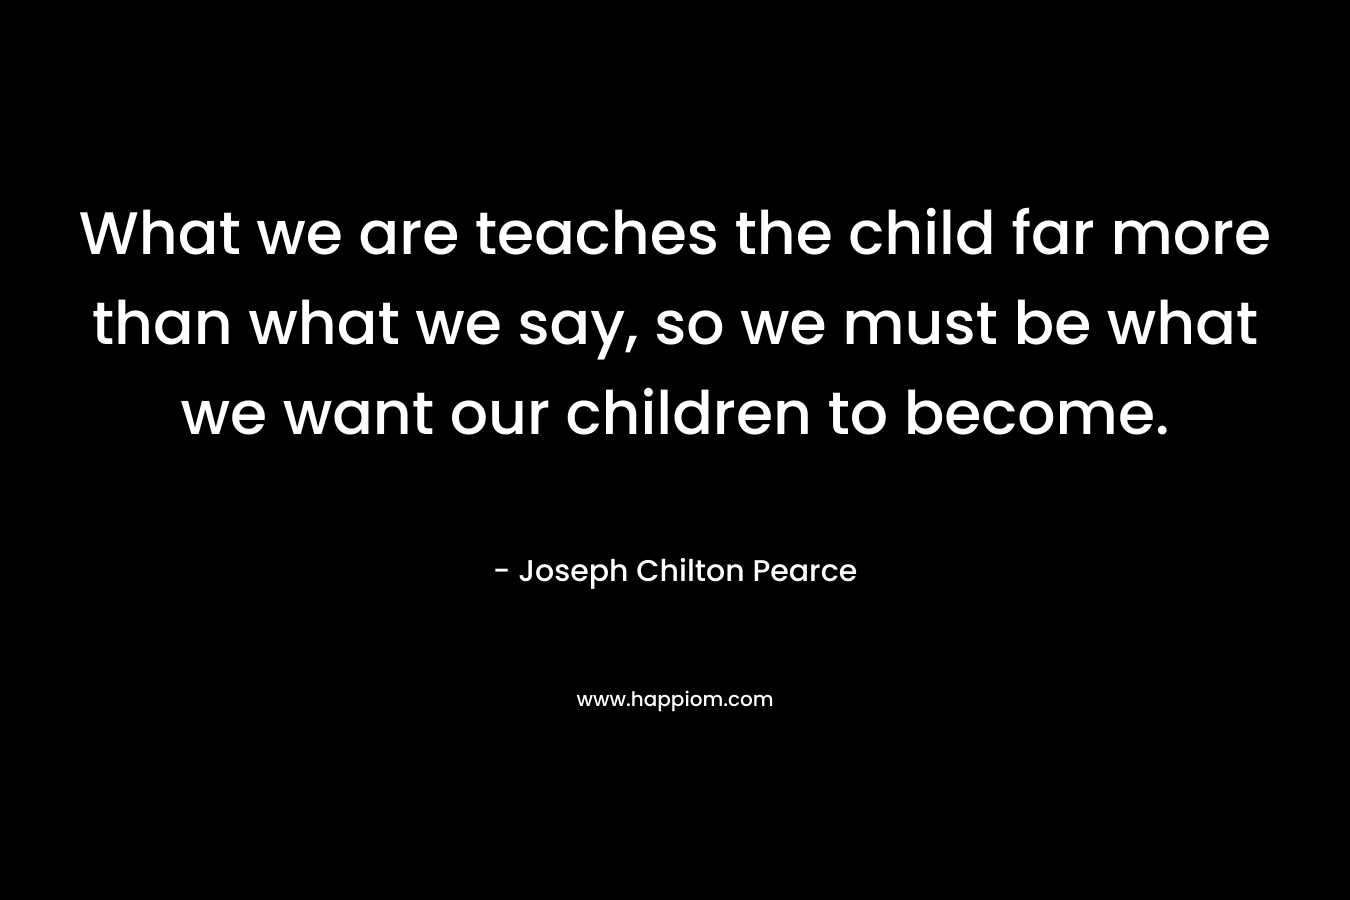 What we are teaches the child far more than what we say, so we must be what we want our children to become.